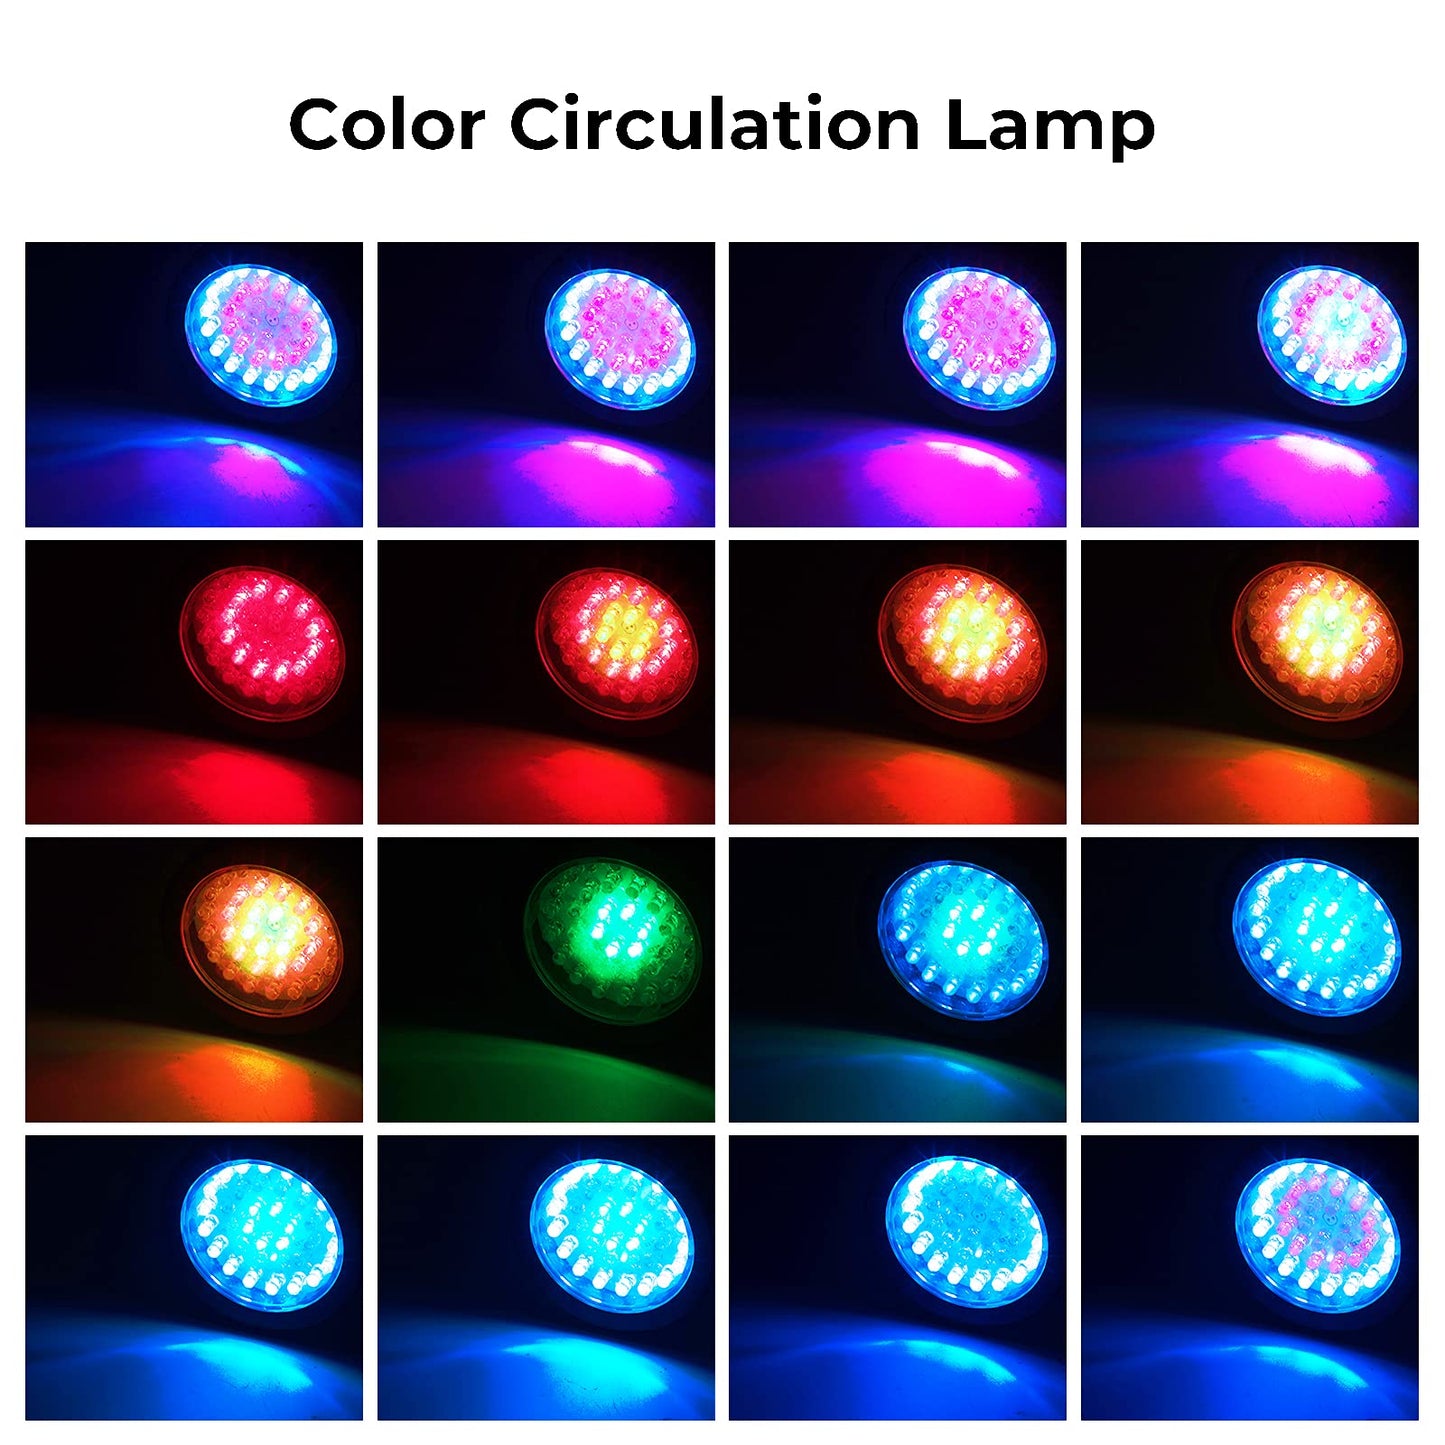 GZKANFUL Color Changing Pond Lights Underwater RGB LED Spotlight Dim Adjustable IP68 Waterproof Submersible Outdoor Landscape Spot Lights for Garden Aquarium Tank Lawn Fountain Tree Flag (6 in Set) - Like New